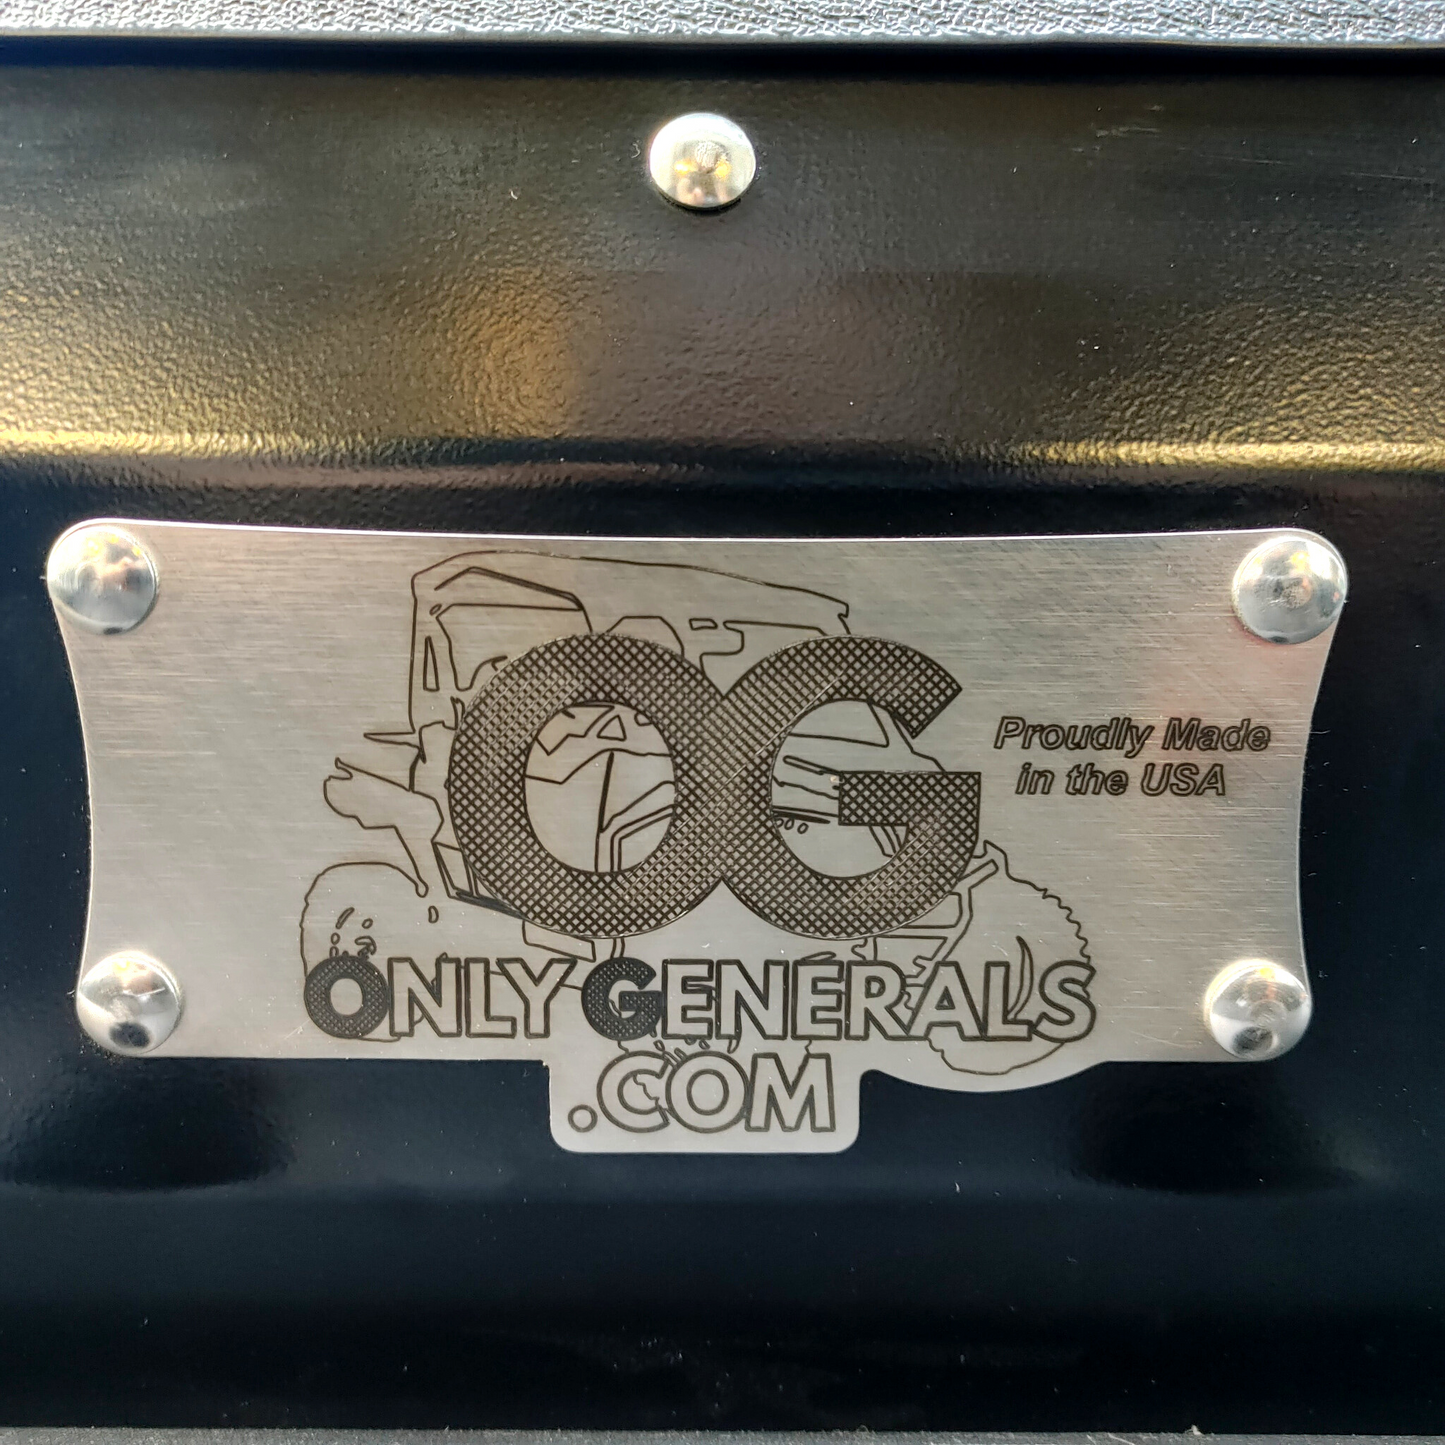 Very close up view of the OnlyGenerals etched stainless steel logo plate on the Polaris General lower filler panel